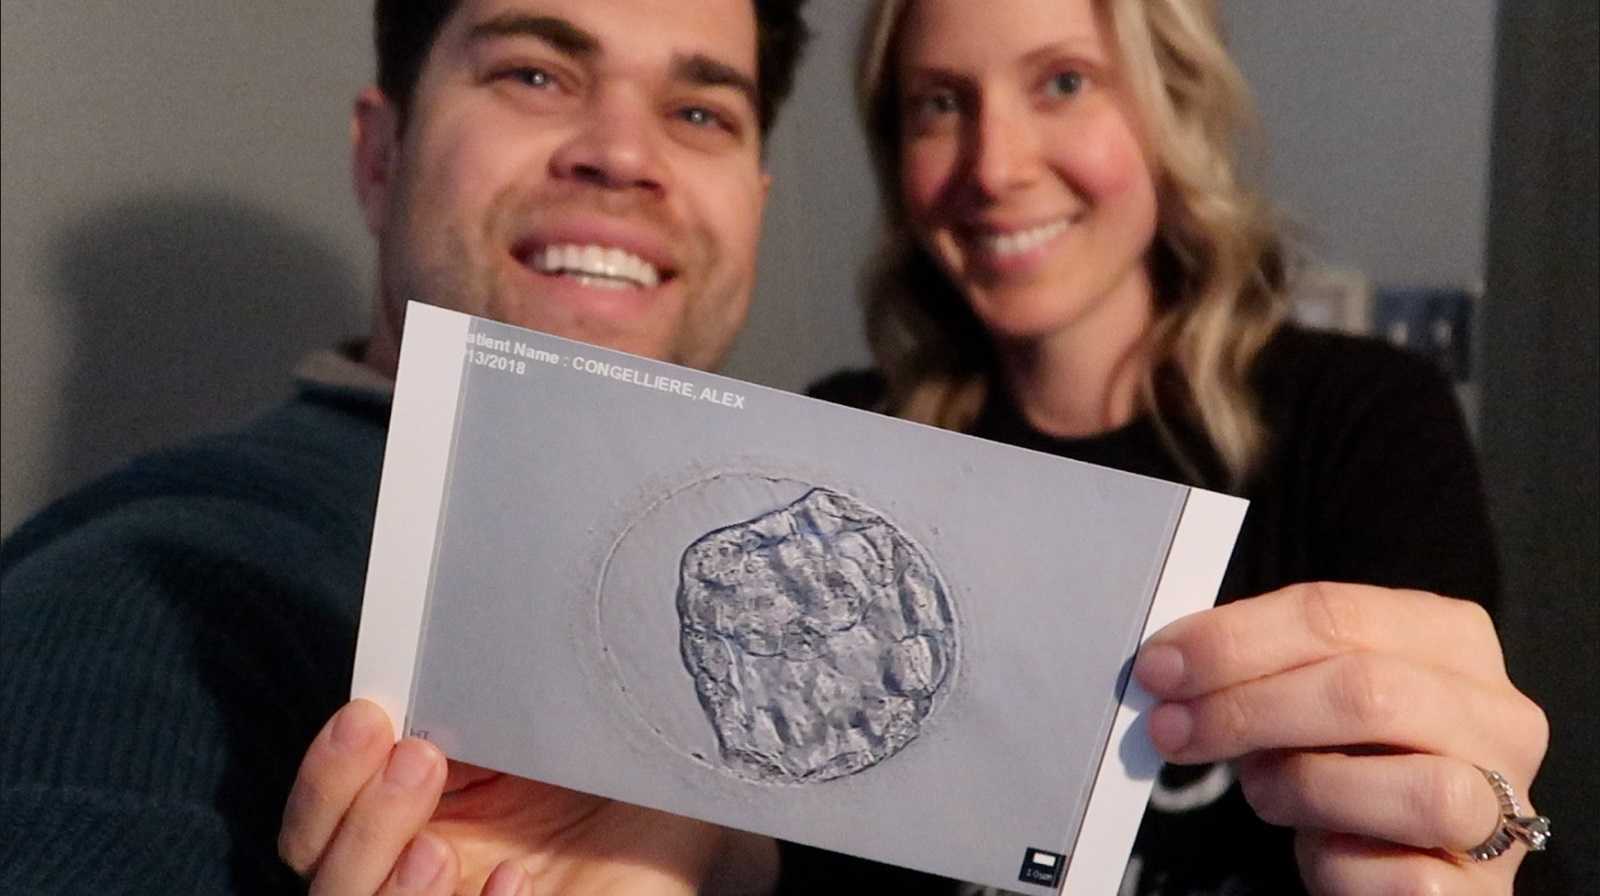 Husband and wife holding up sonogram of IVF baby